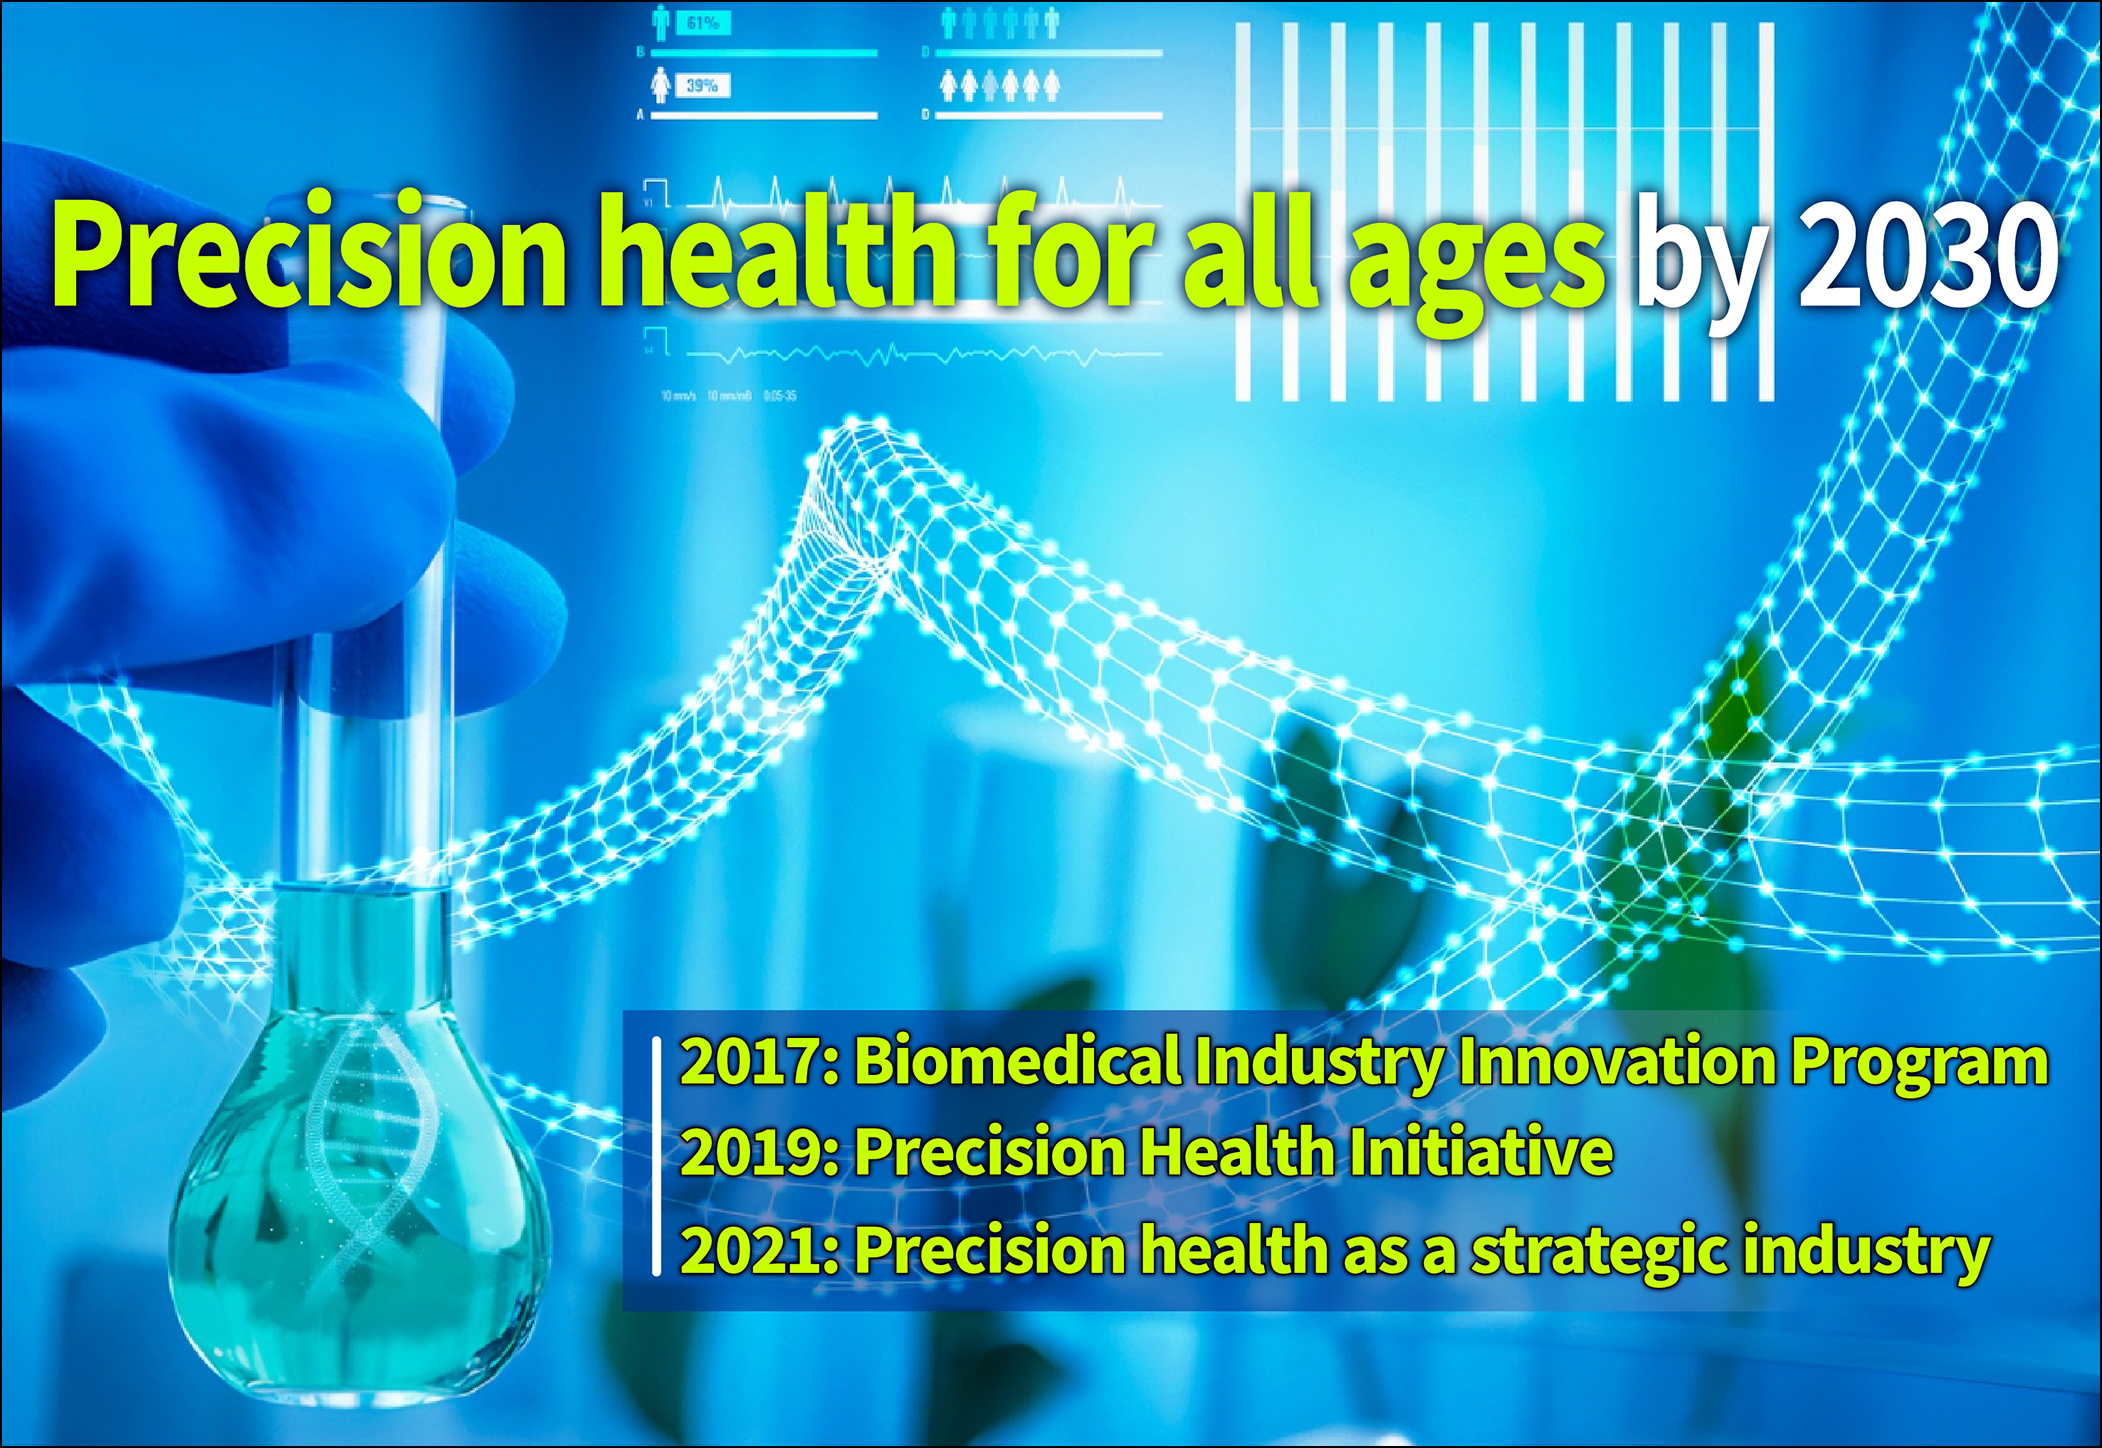 Promoting precision health as a strategic industry